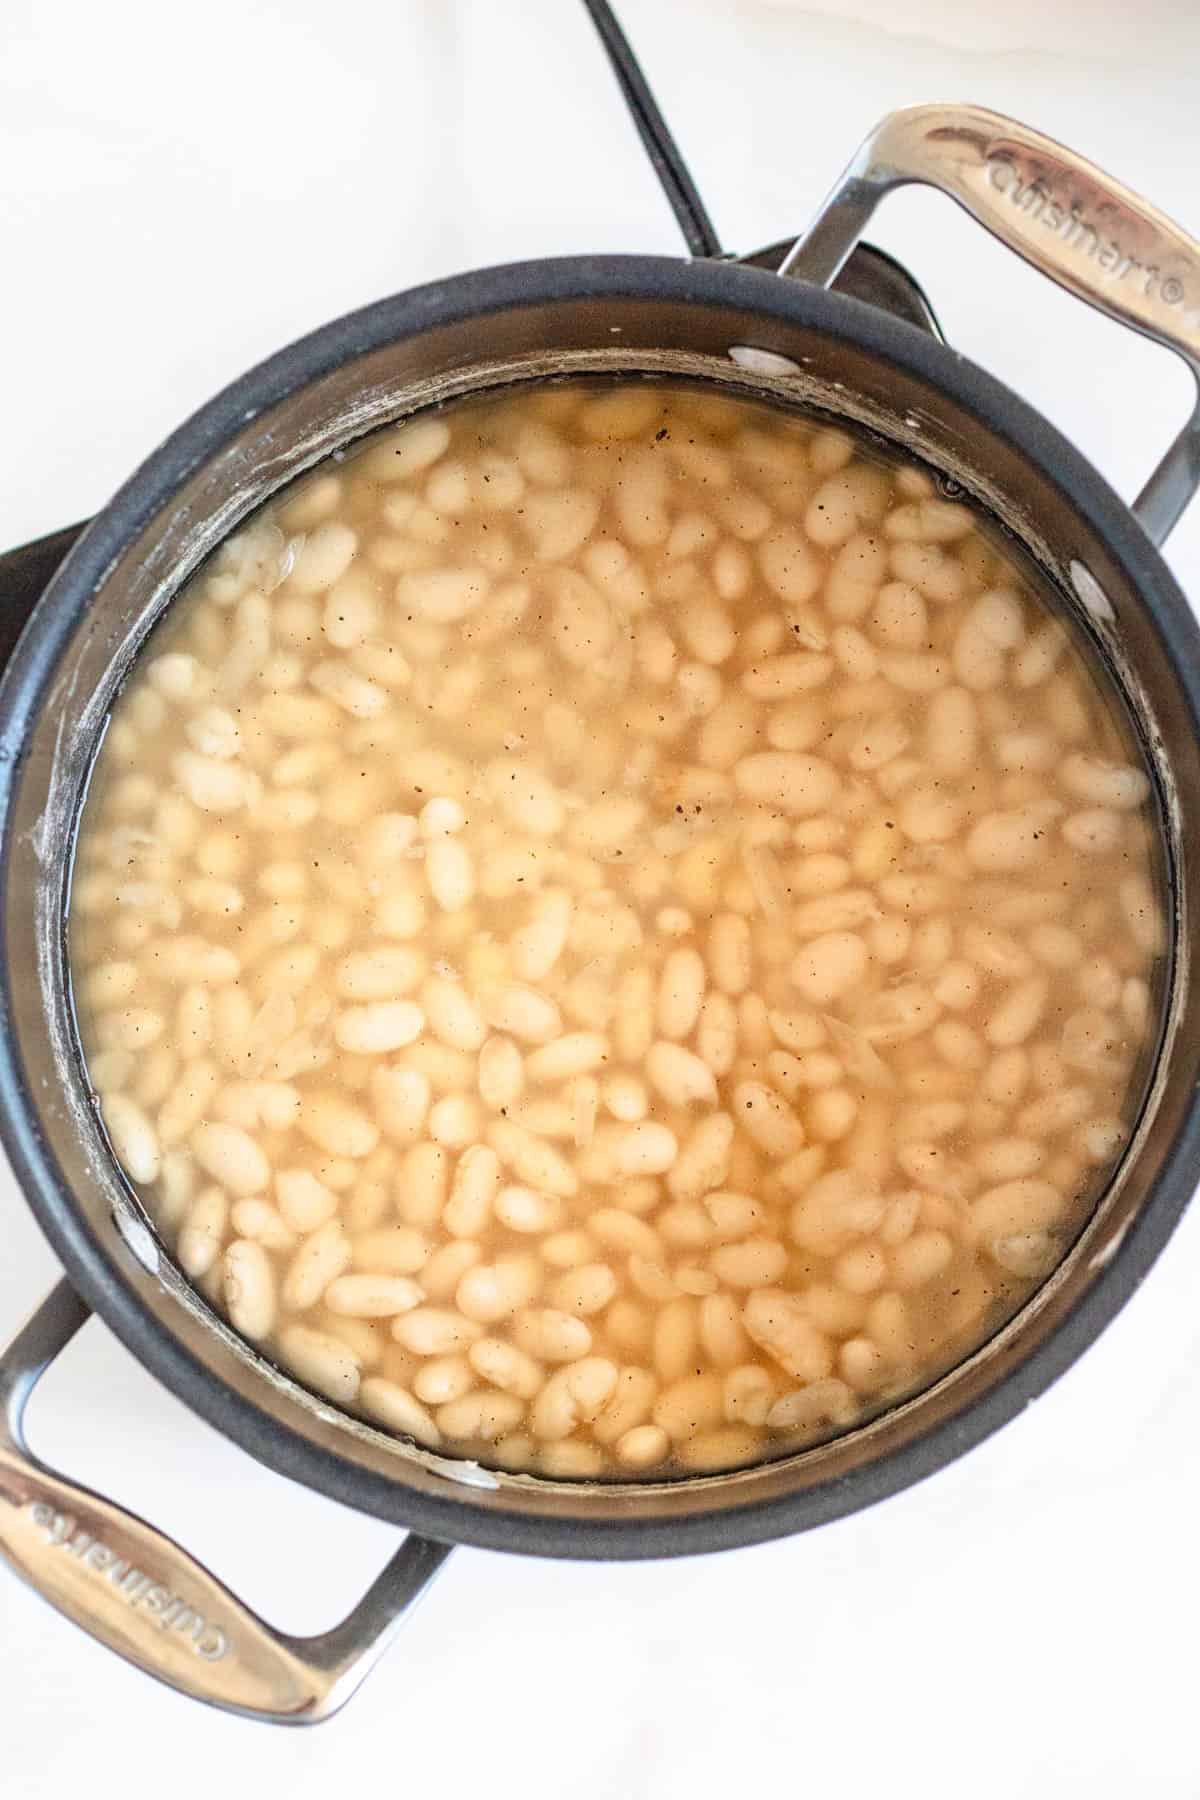 White beans cooking in a saucepan for fagioli or white bean soup.